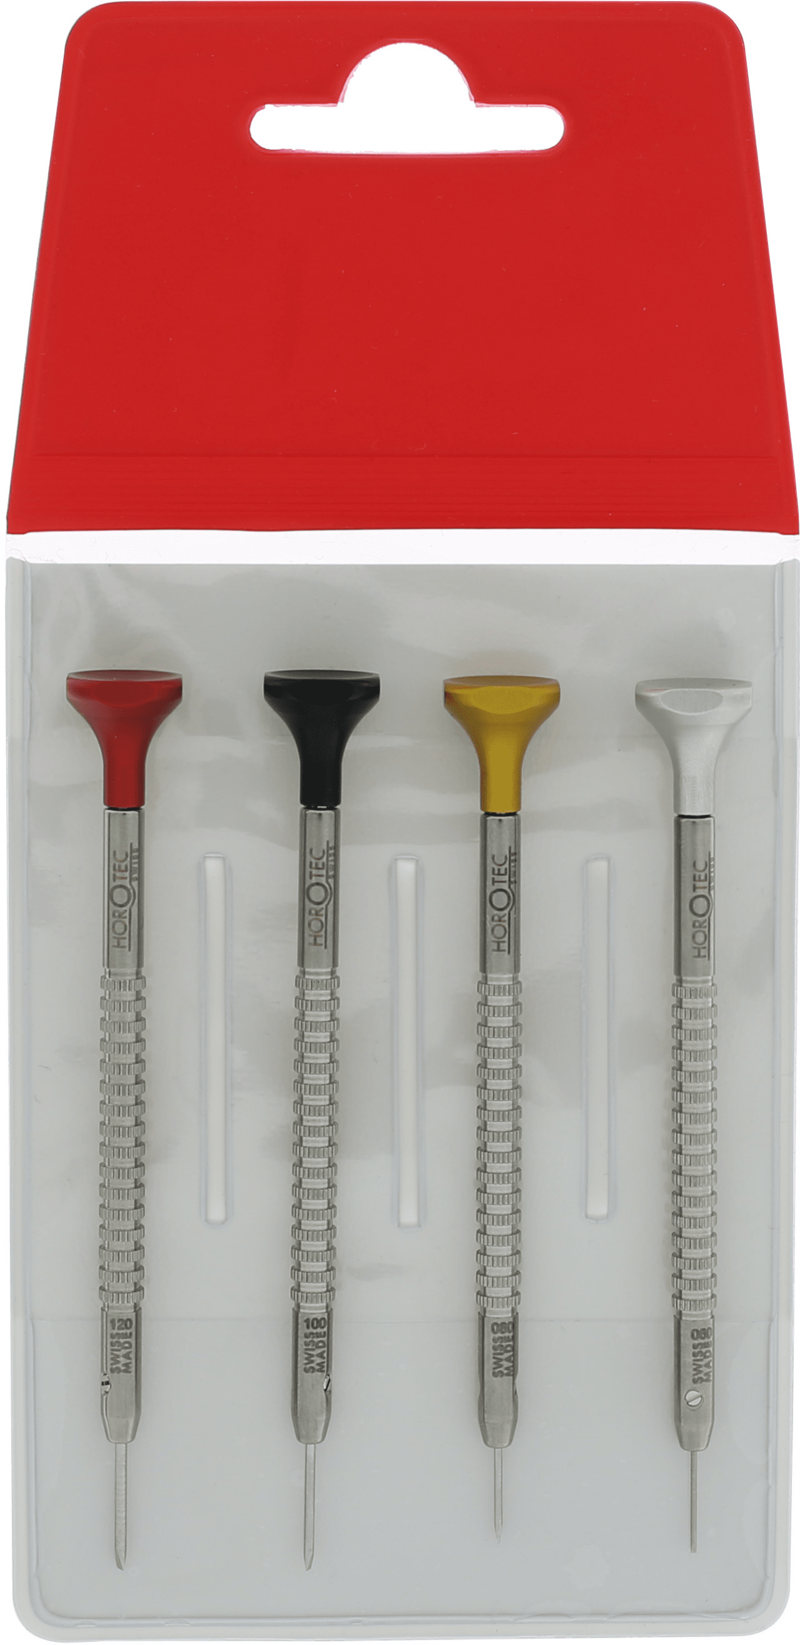 Horotec 4 Piece Screwdriver Set Product Thumbail (View full Size)